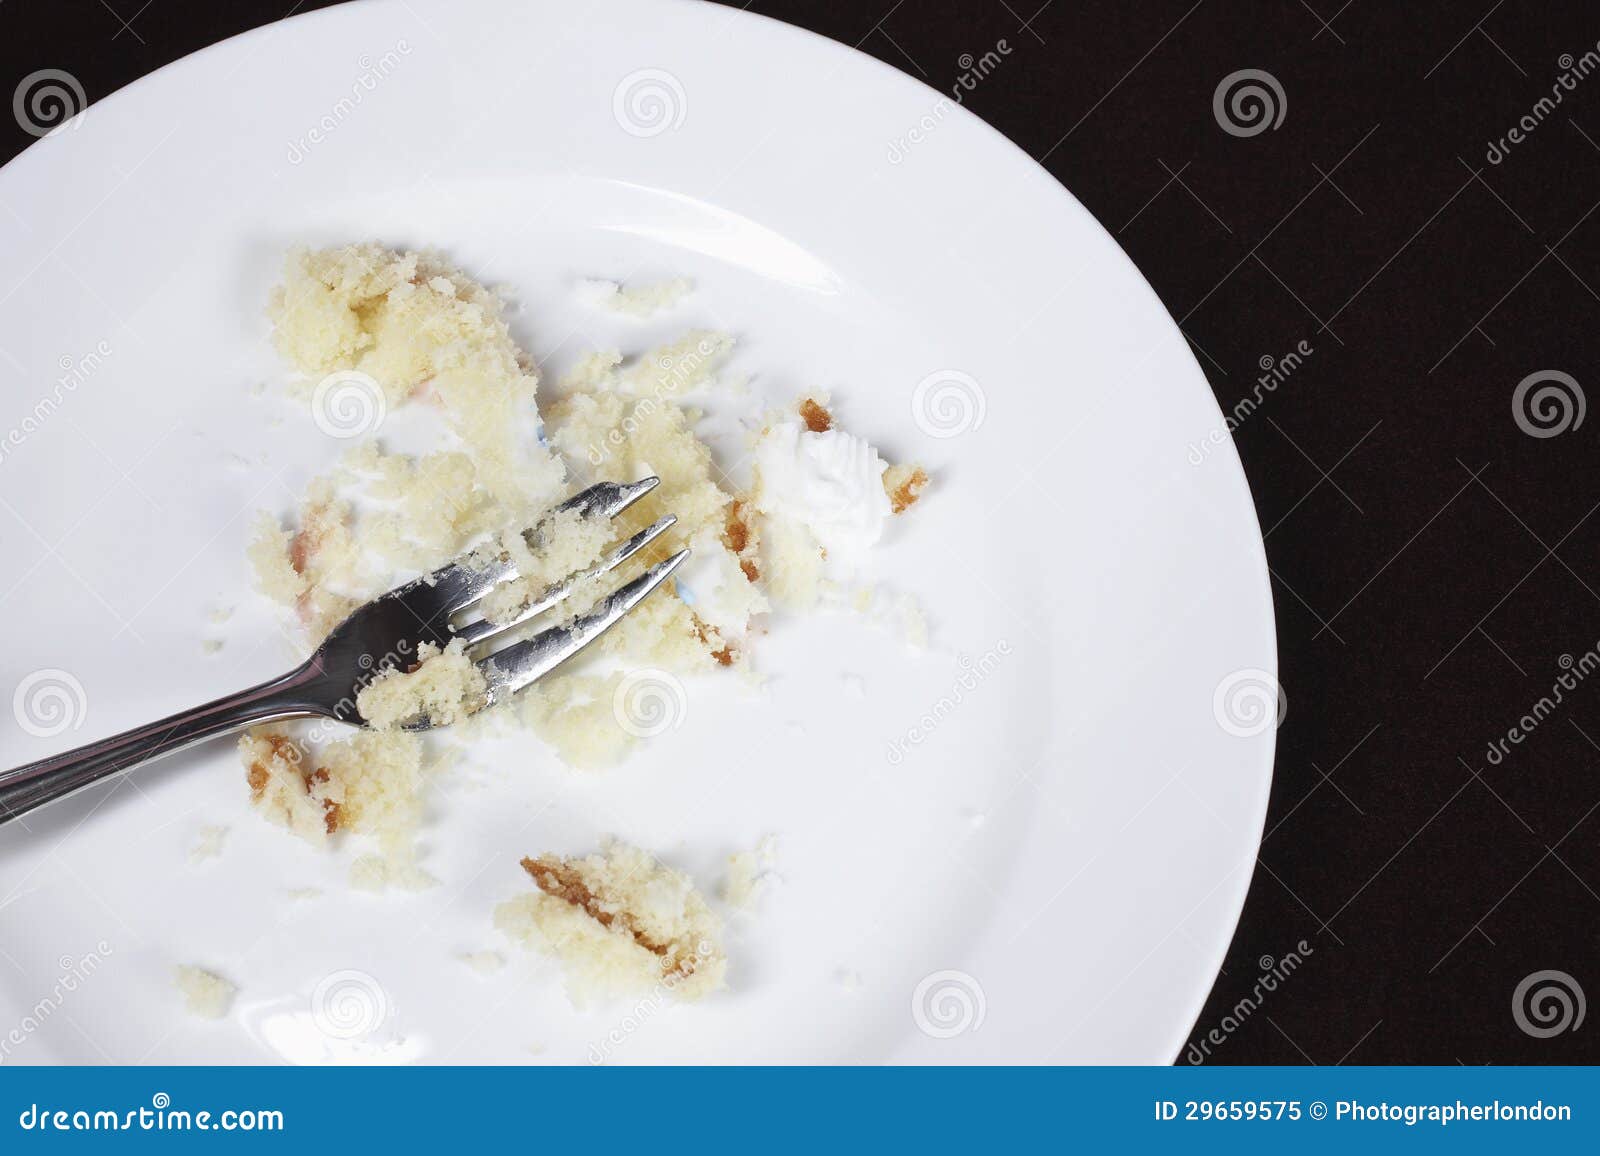 fork and cake crumbs on plate